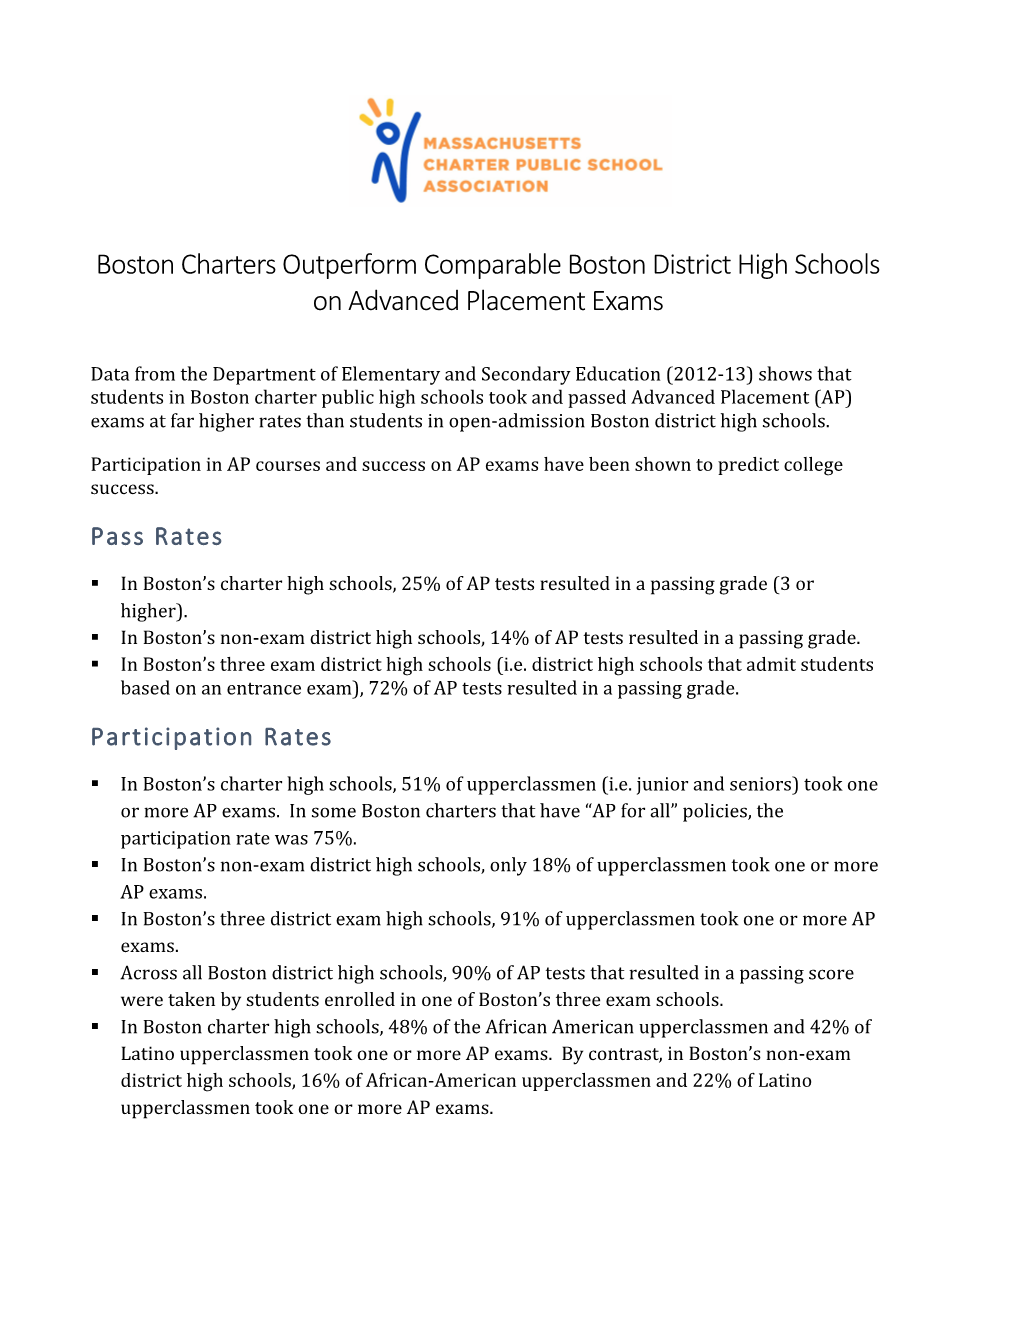 Boston Charters Outperform Comparable Boston District High Schools on Advanced Placement Exams